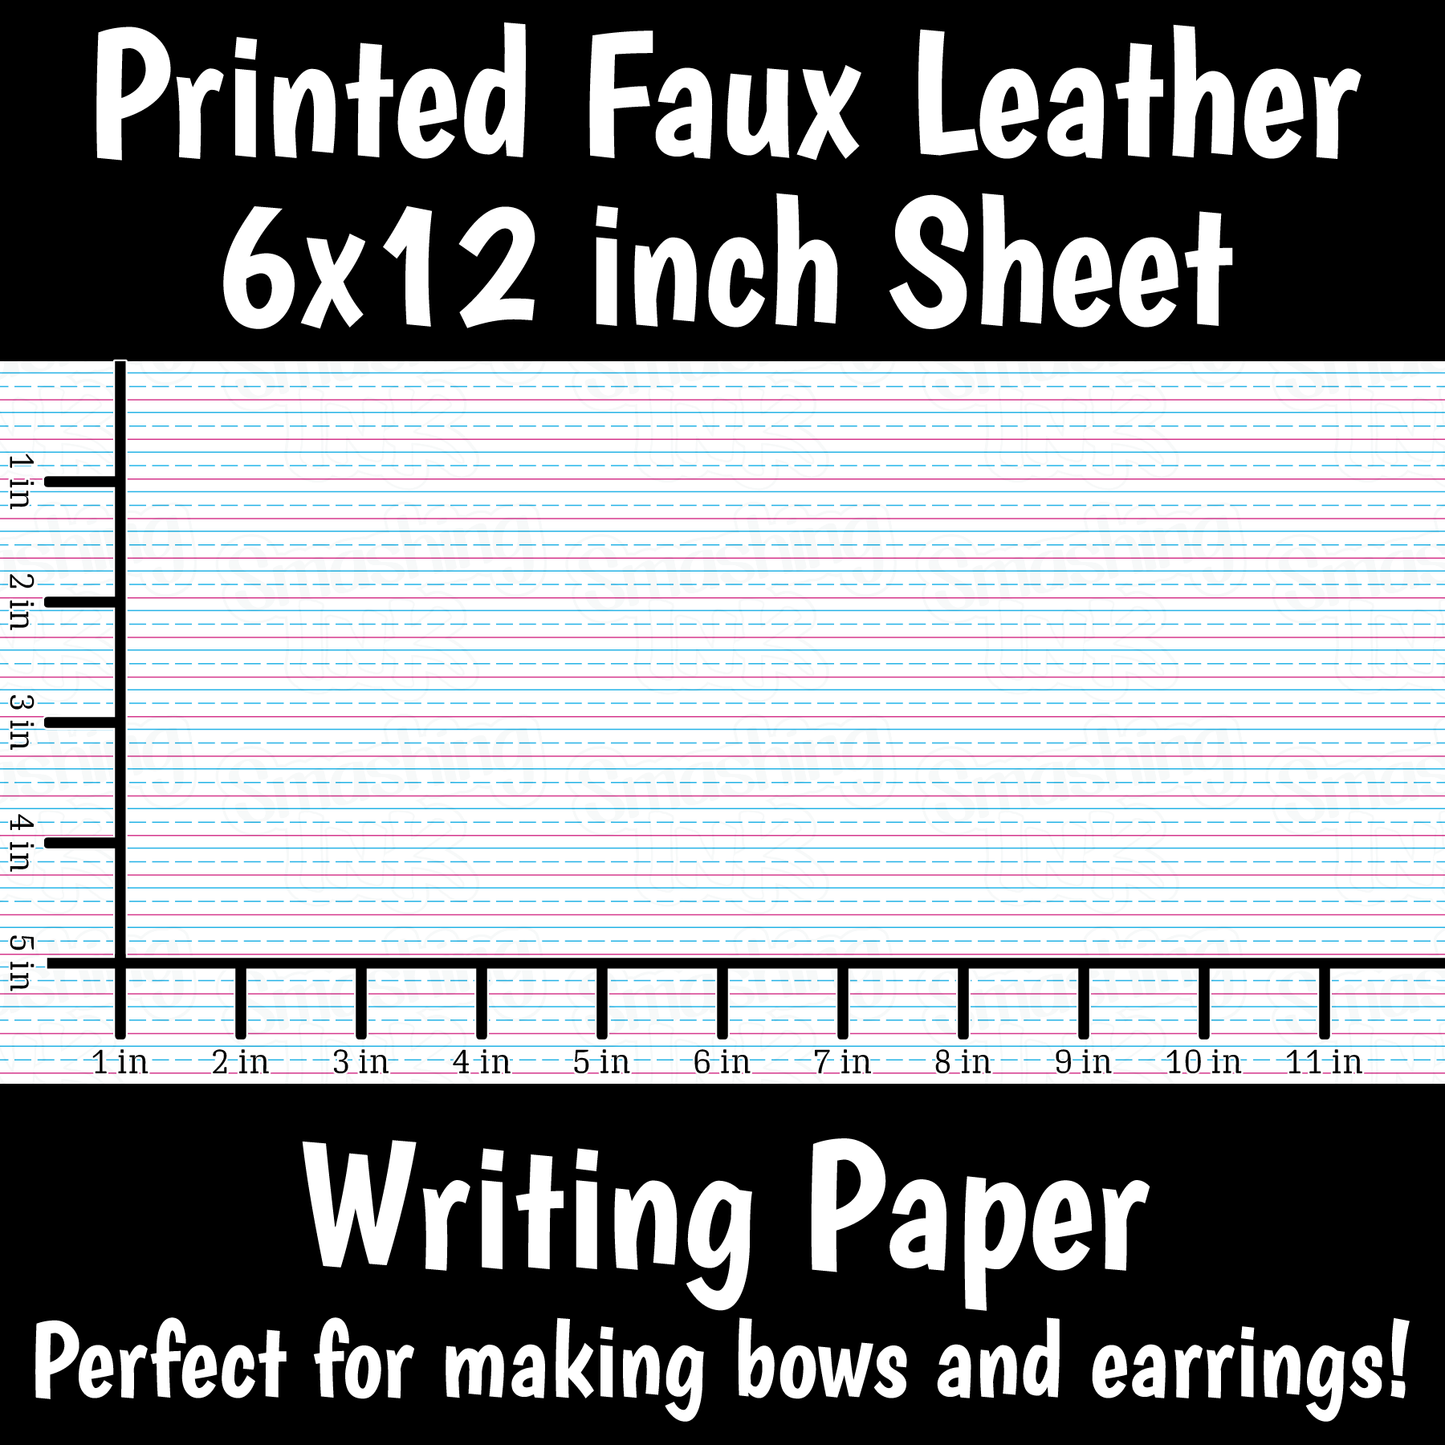 Writing Paper - Faux Leather Sheet